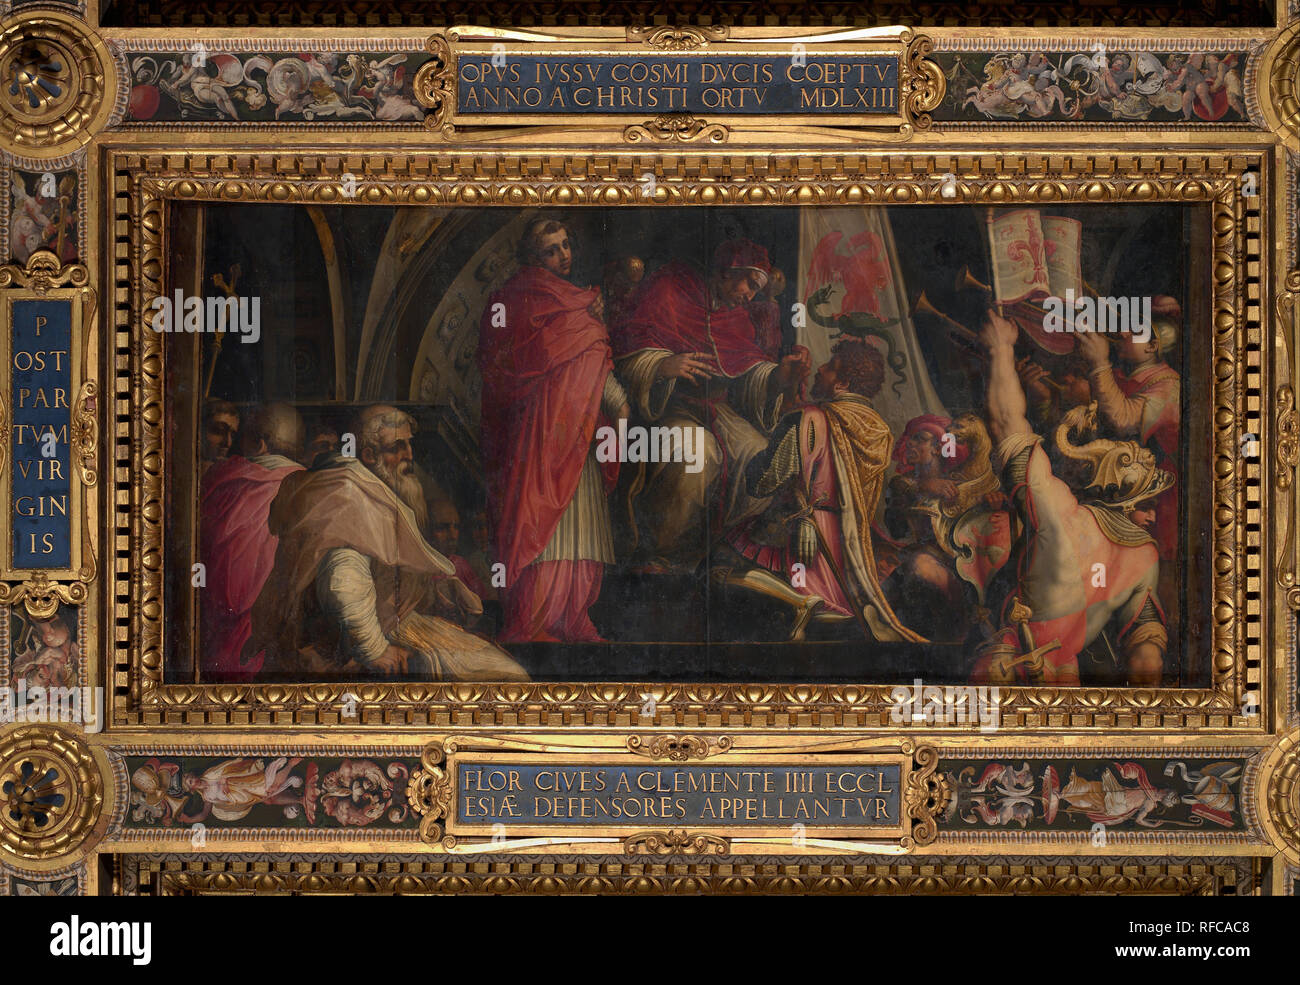 Clemente IV hands his insigna to the captains of the Guelph Part. Date/Period: 1563 - 1565. Oil painting on wood. Height: 250 mm (9.84 in); Width: 540 mm (21.25 in). Author: Giorgio Vasari. VASARI, GIORGIO. Stock Photo